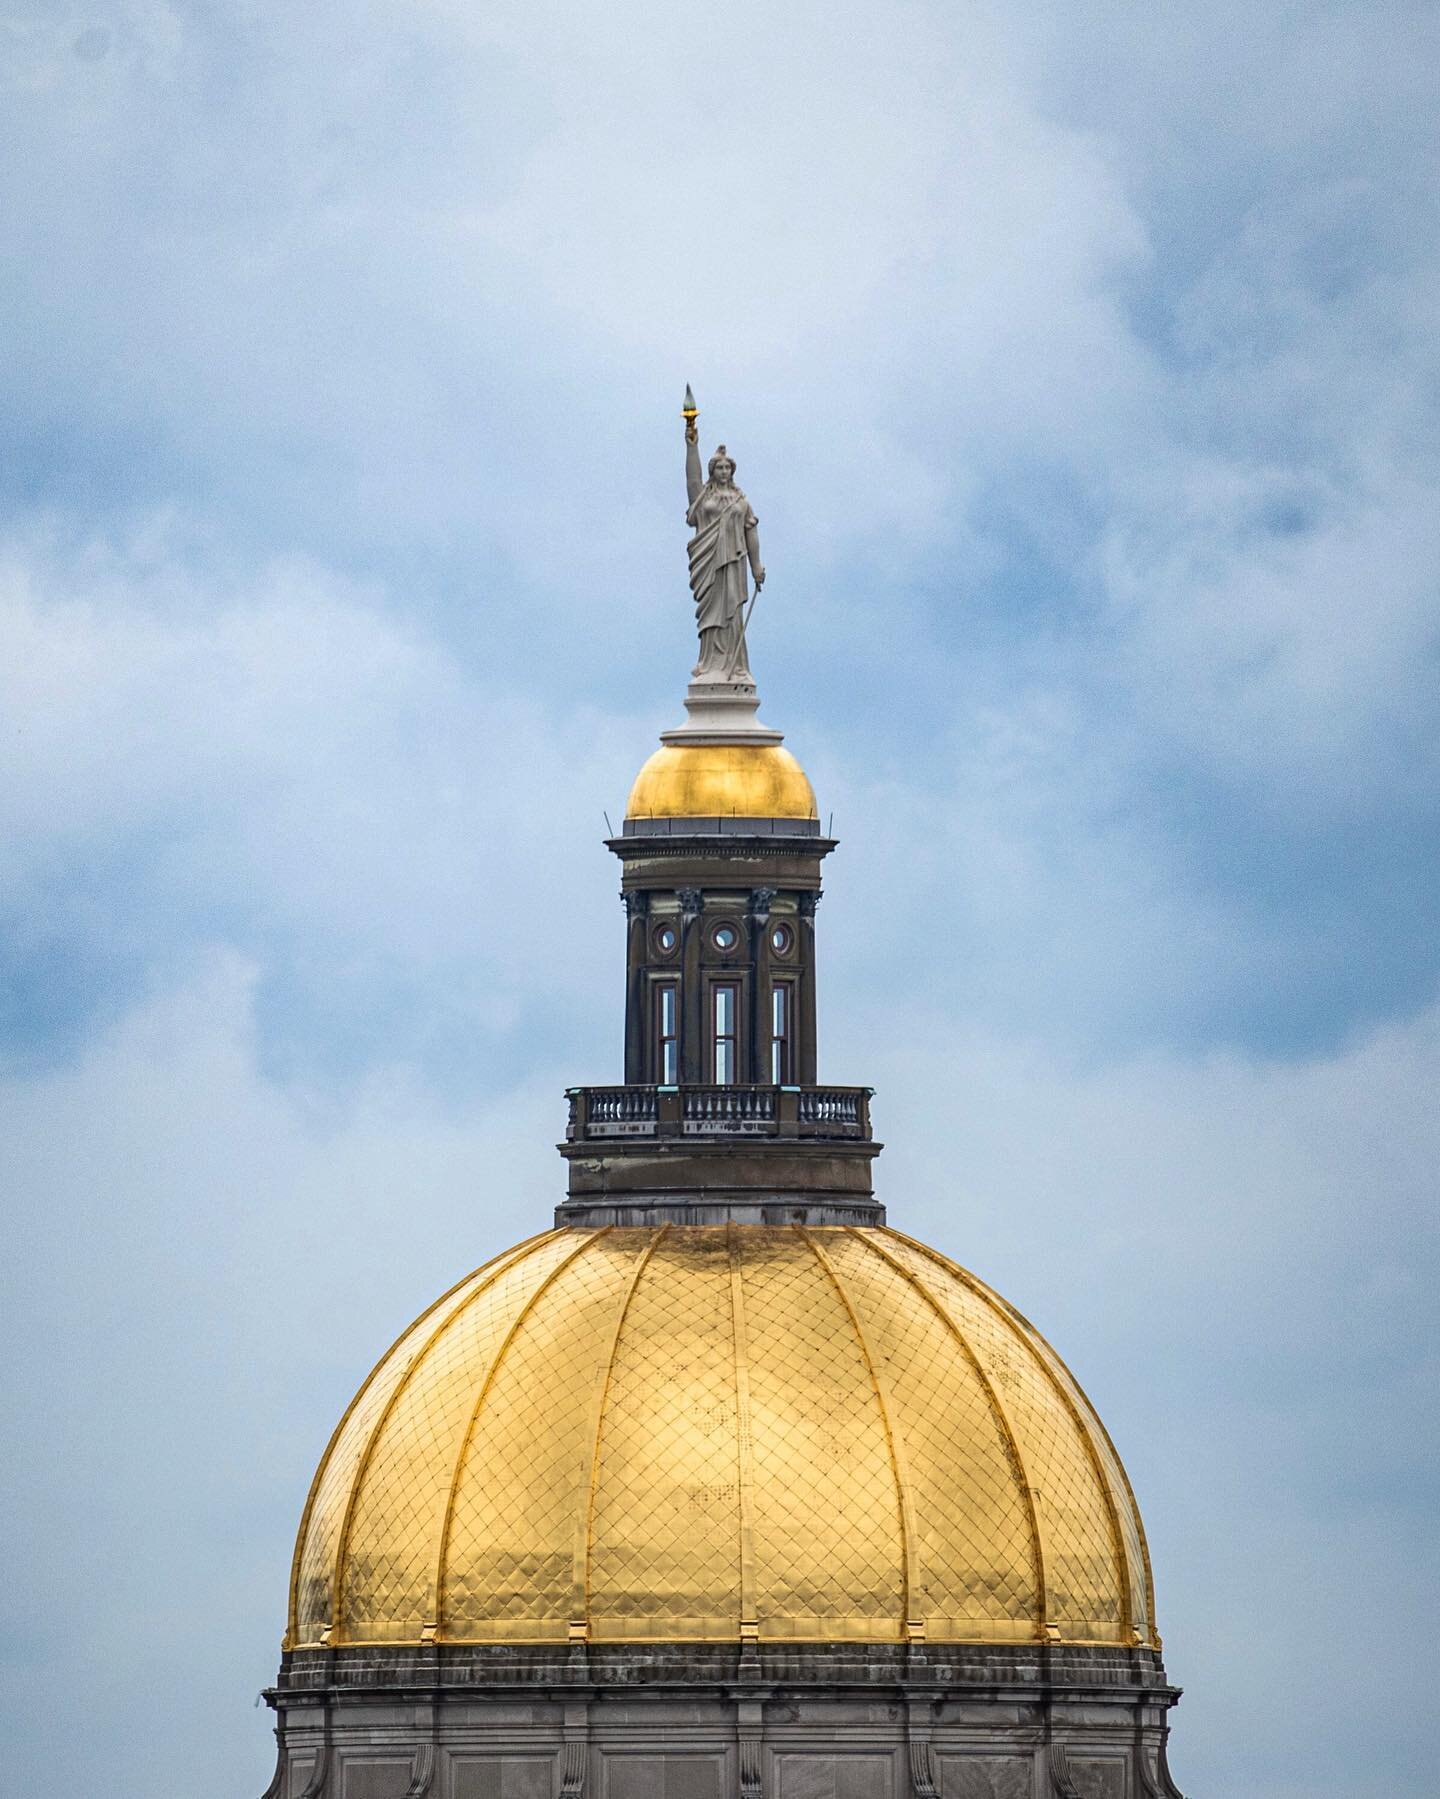 The view of Miss Freedom on top of the Georgia State Capitol from the roof of 222 Mitchell Street in @southdwntn. Of all the beautifully proportioned female sculptures I&rsquo;ve seen and studied, this one seems to have fallen into the, &ldquo;good e